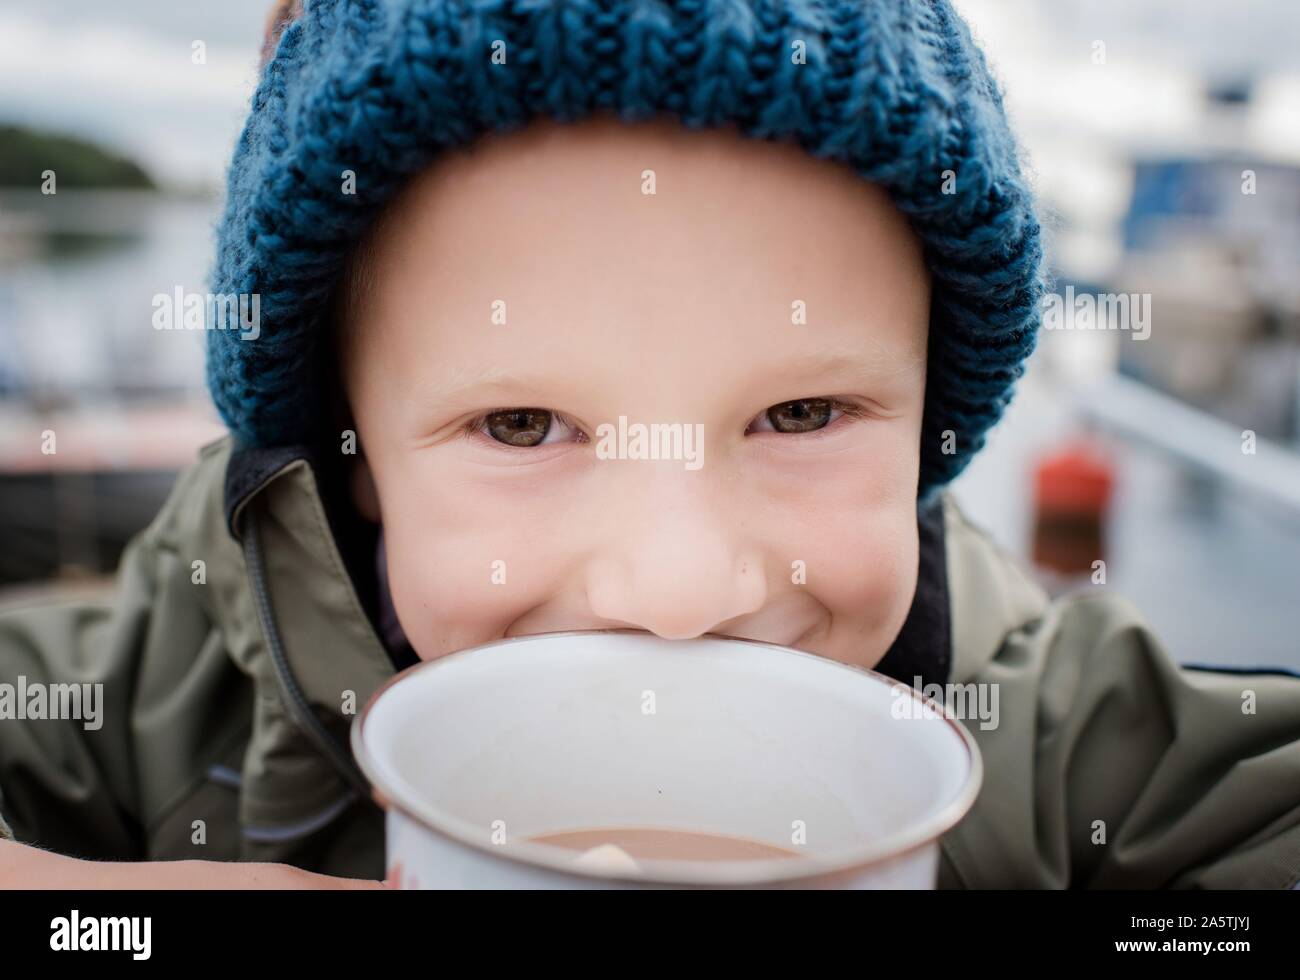 close up portrait of a boy drinking hot chocolate outside camping Stock Photo